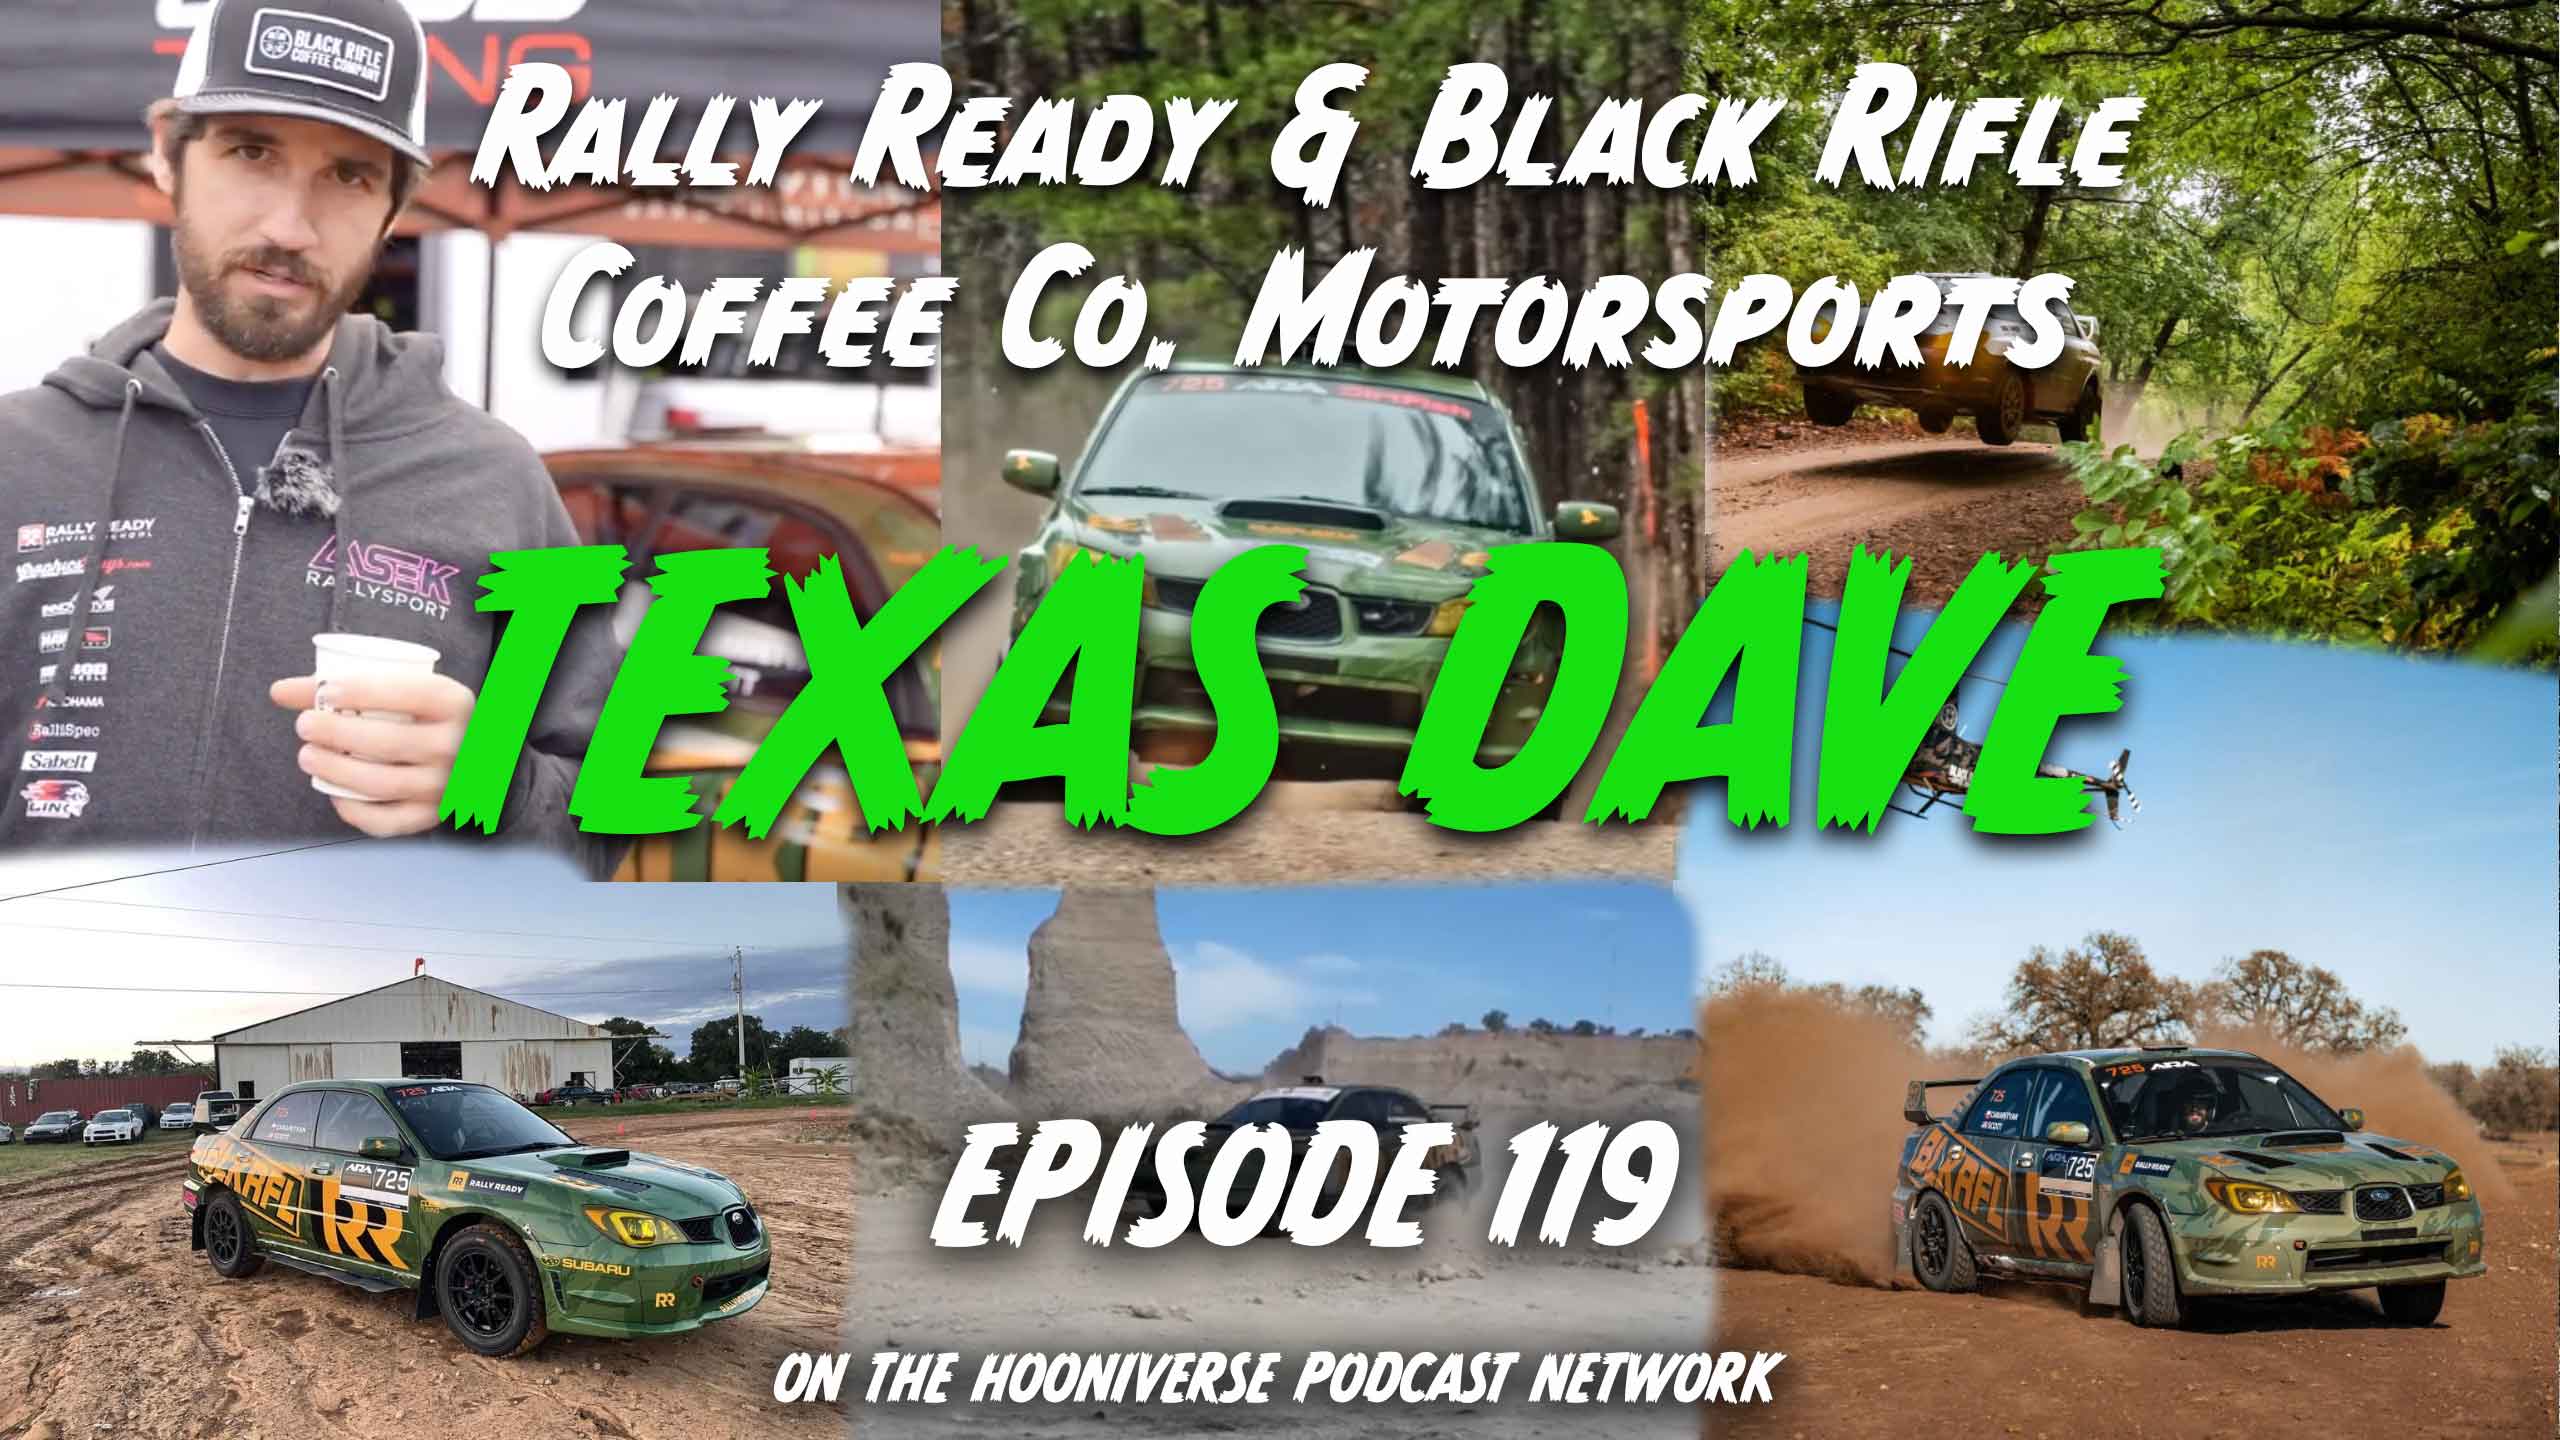 Texas-Dave-Returns-Off-The-Road-Again-Podcast-Episode-119